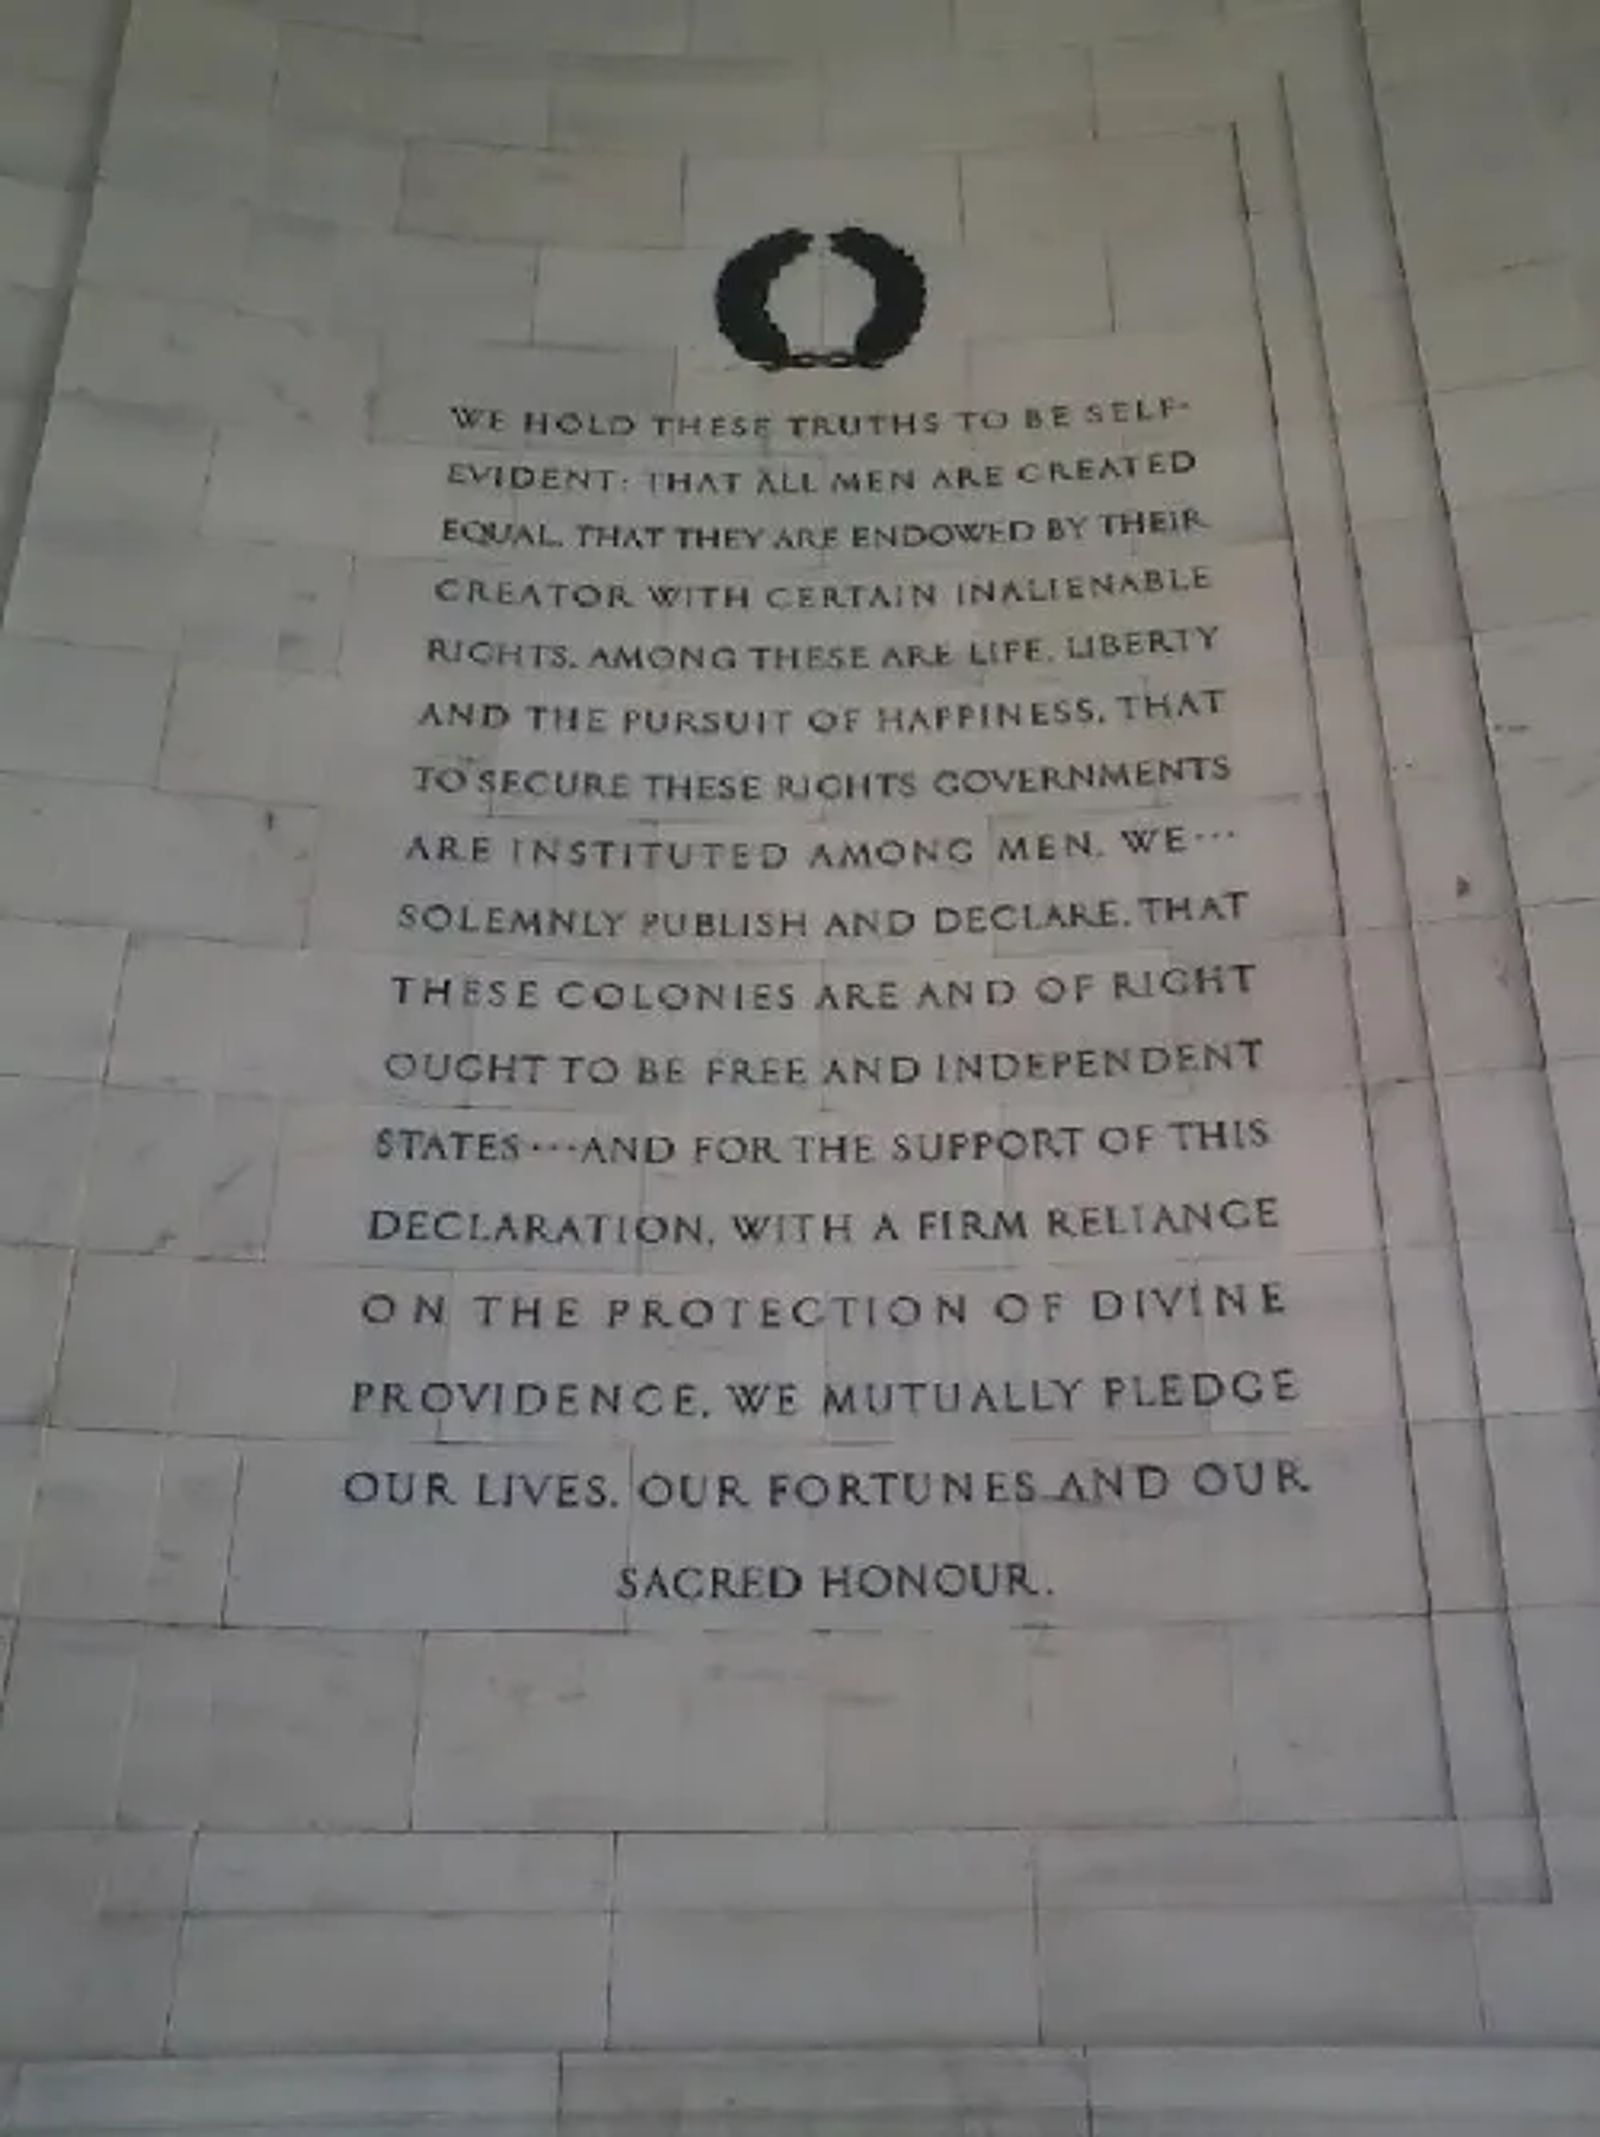 Photo showing excerpts from the Declaration of Independence that are carved into the wall of the Jefferson Memorial in Washington, DC